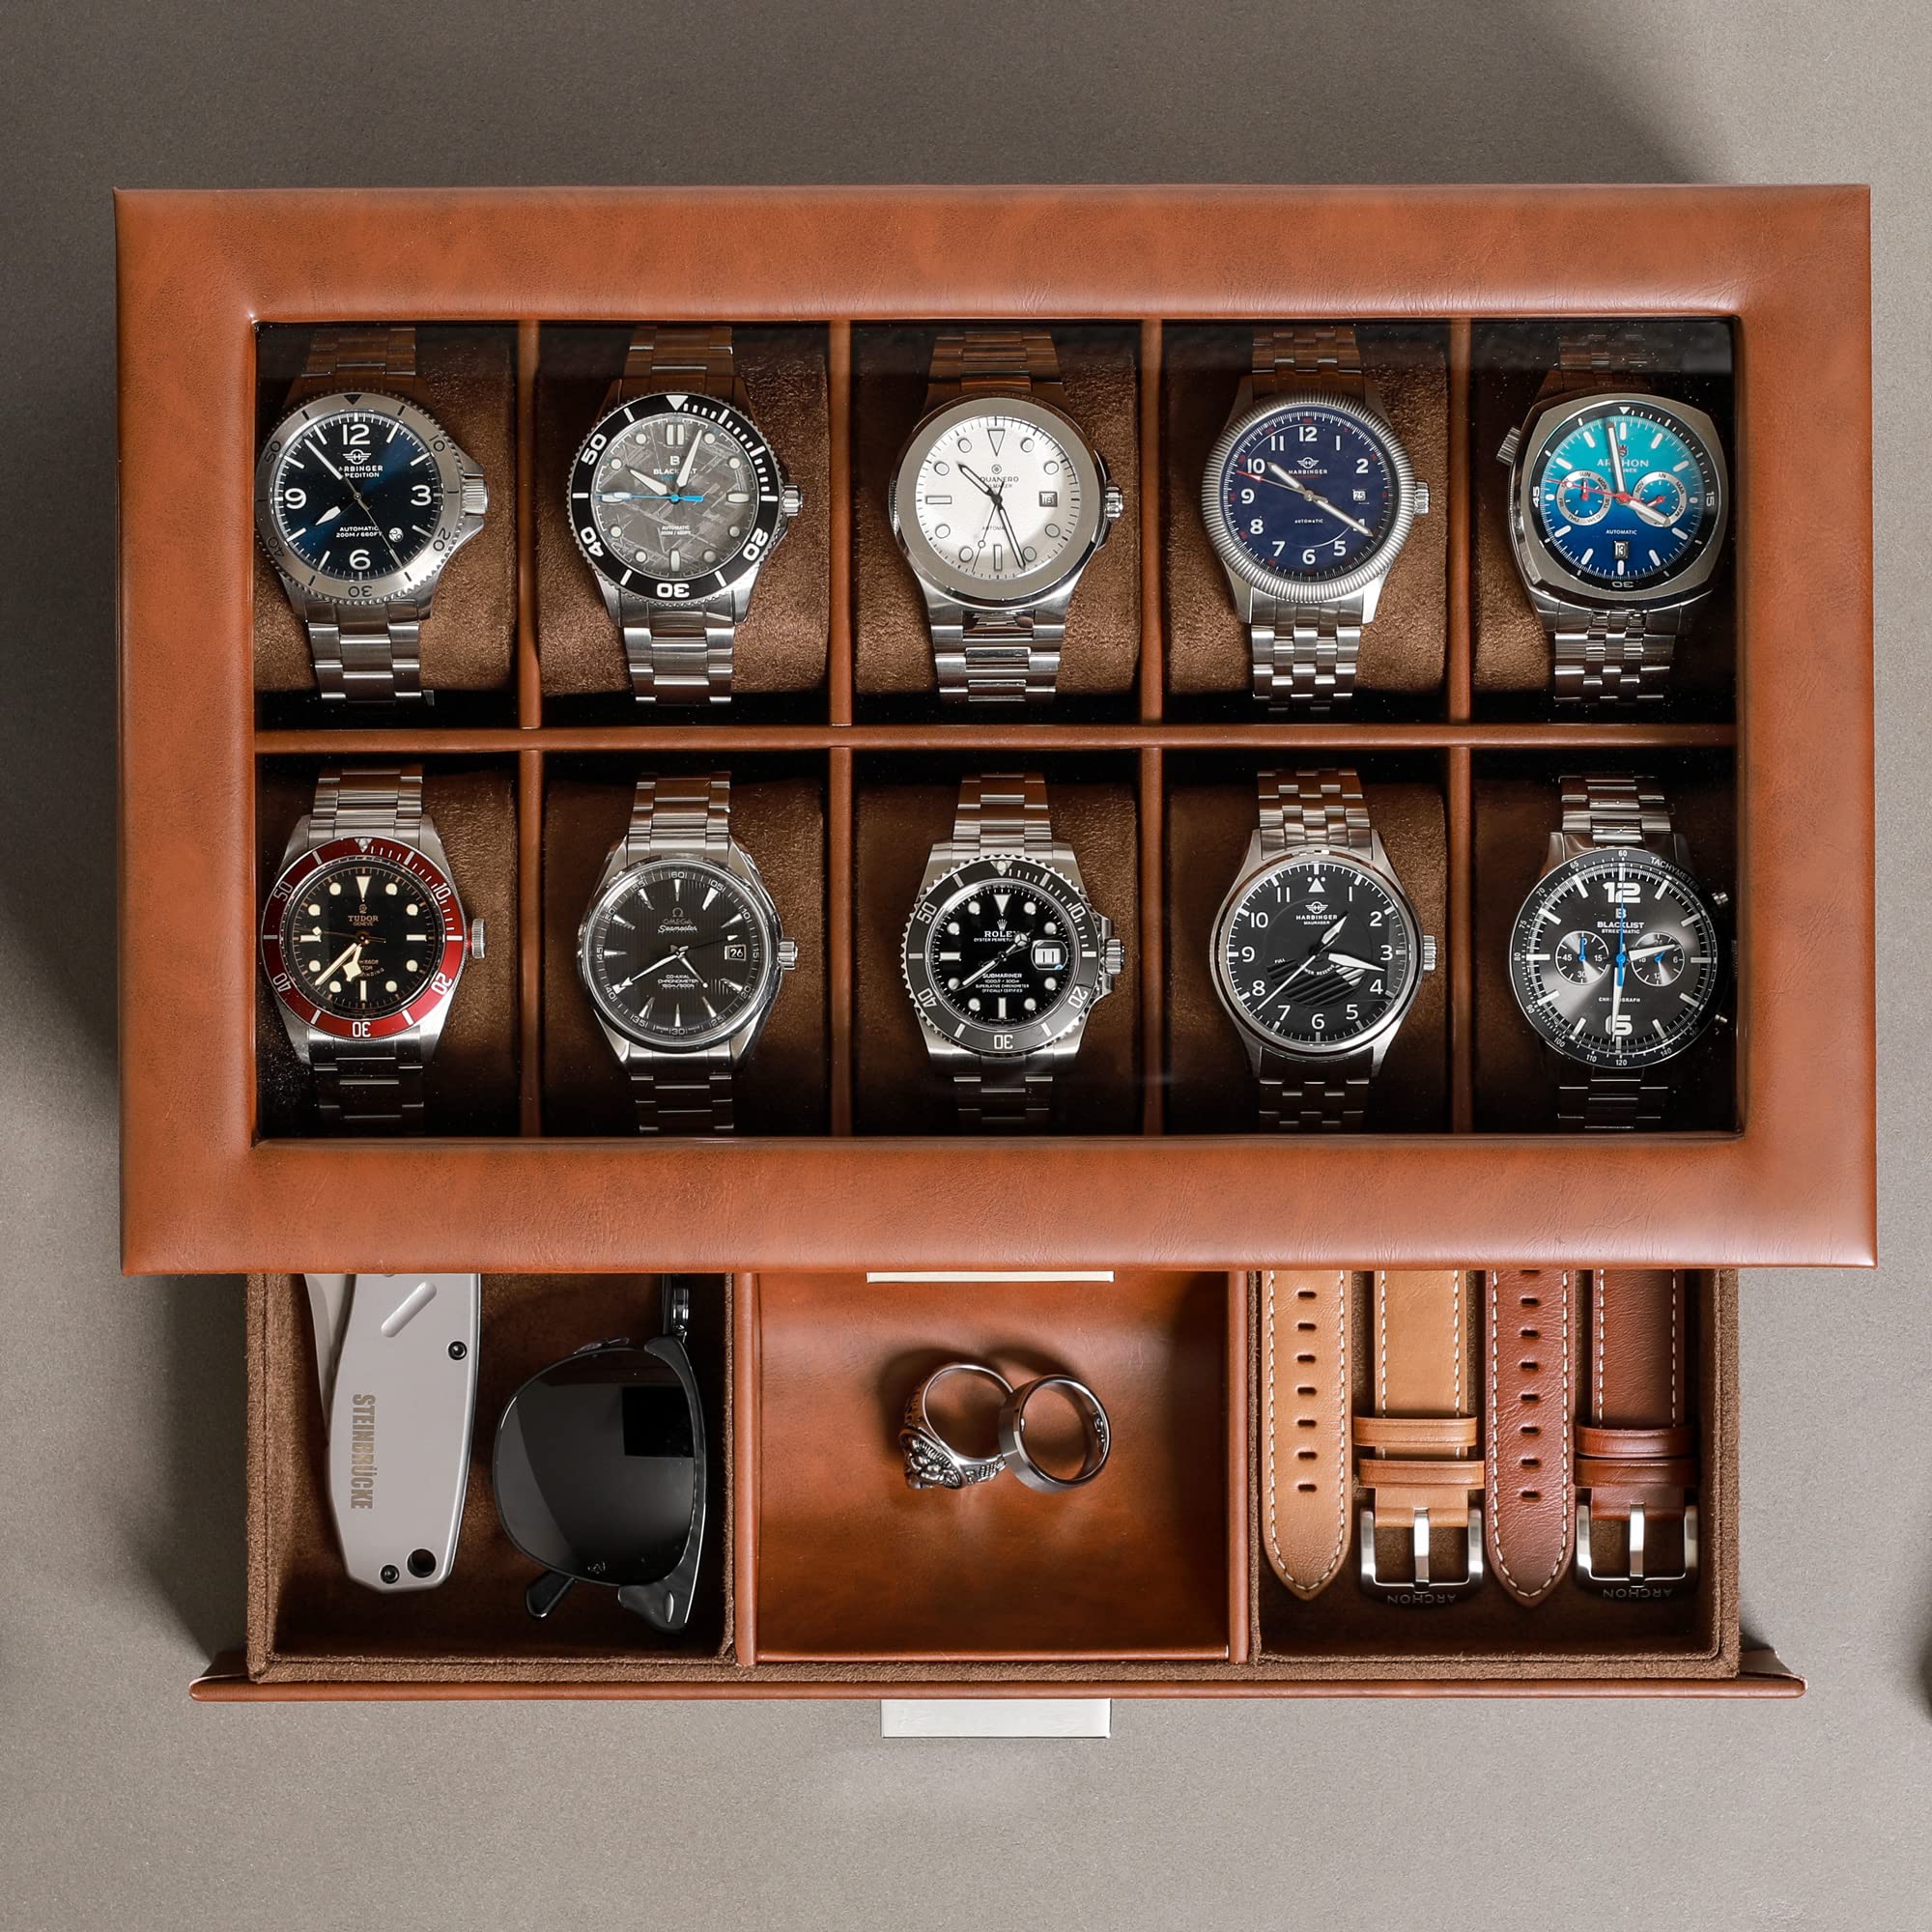 Gift Set 10 Slot Leather Watch Box with Valet Drawer & Matching 2 Watch Travel Case - Luxury Watch Case Display Organizer, Locking Mens Jewelry Watches Holder, Men's Storage Boxes Glass Top Tan/Brown